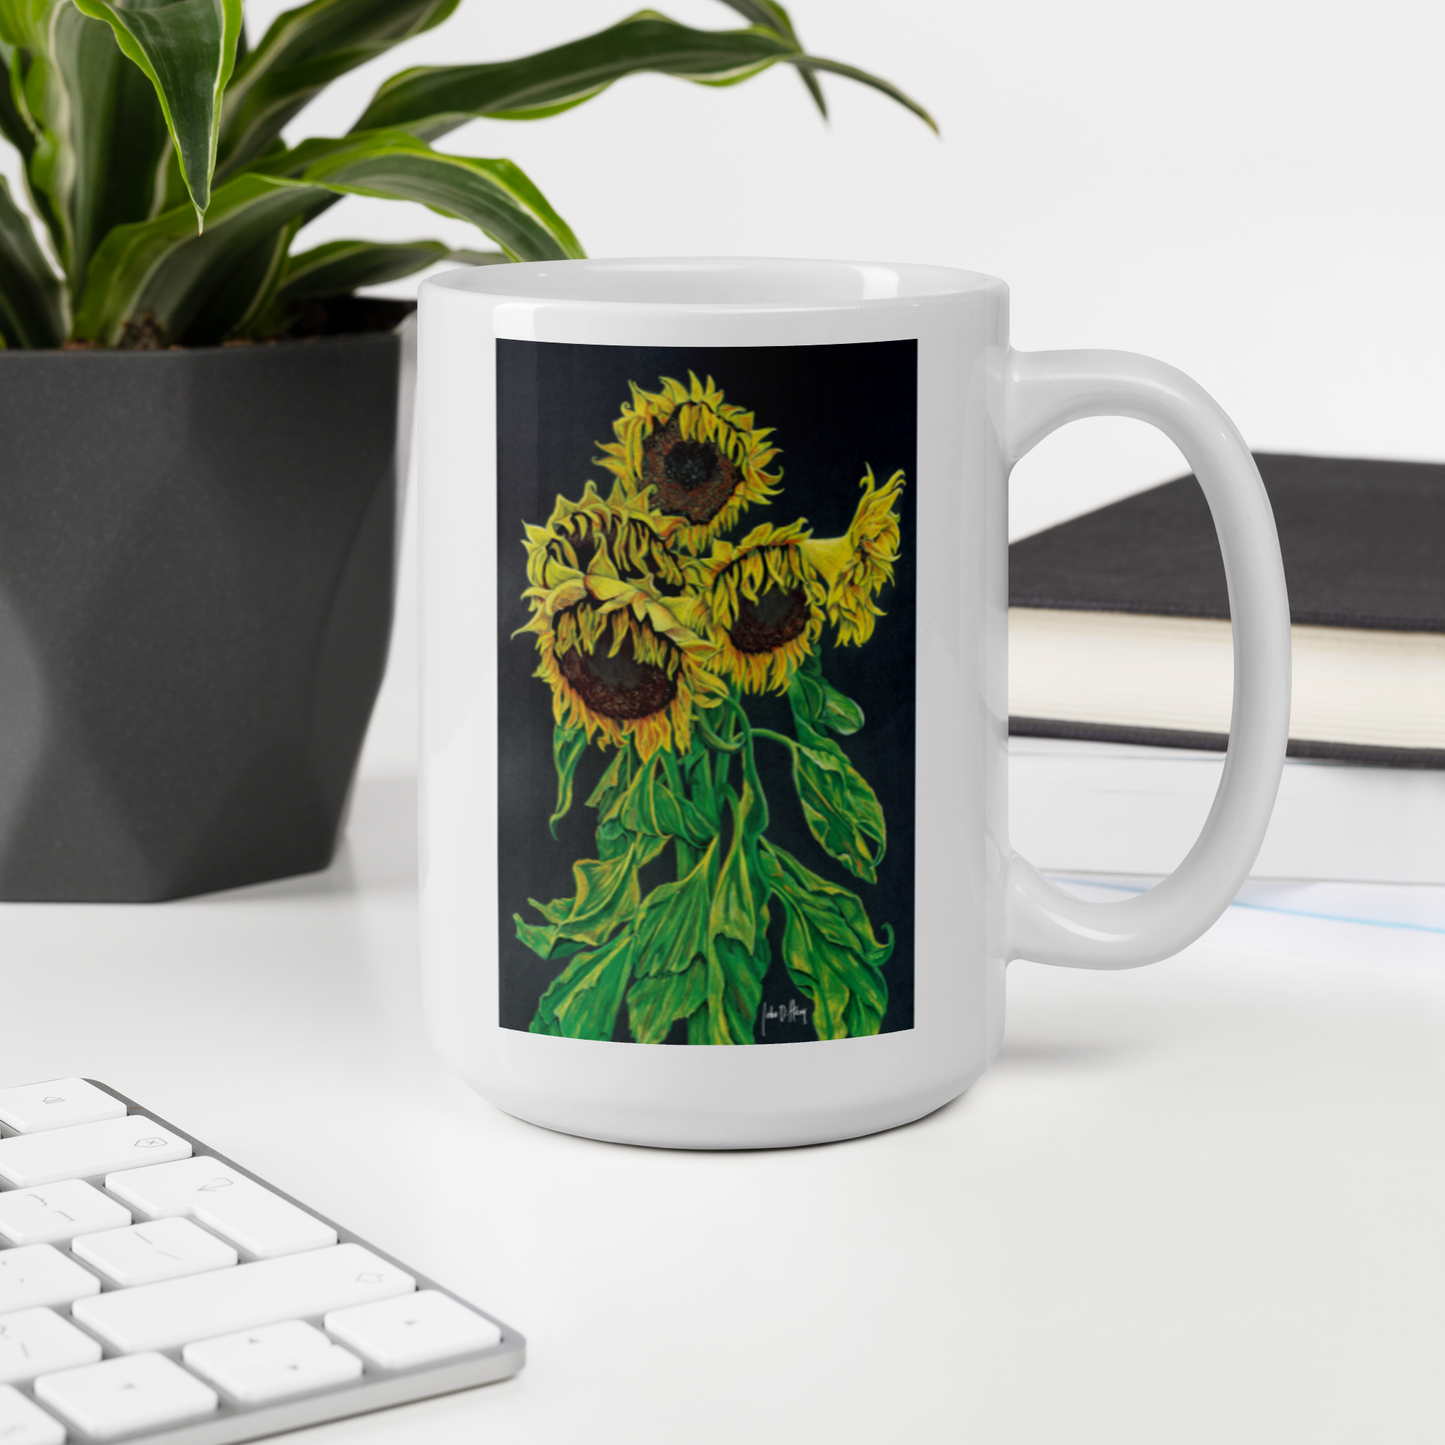 Out of the Darkness - White glossy mug